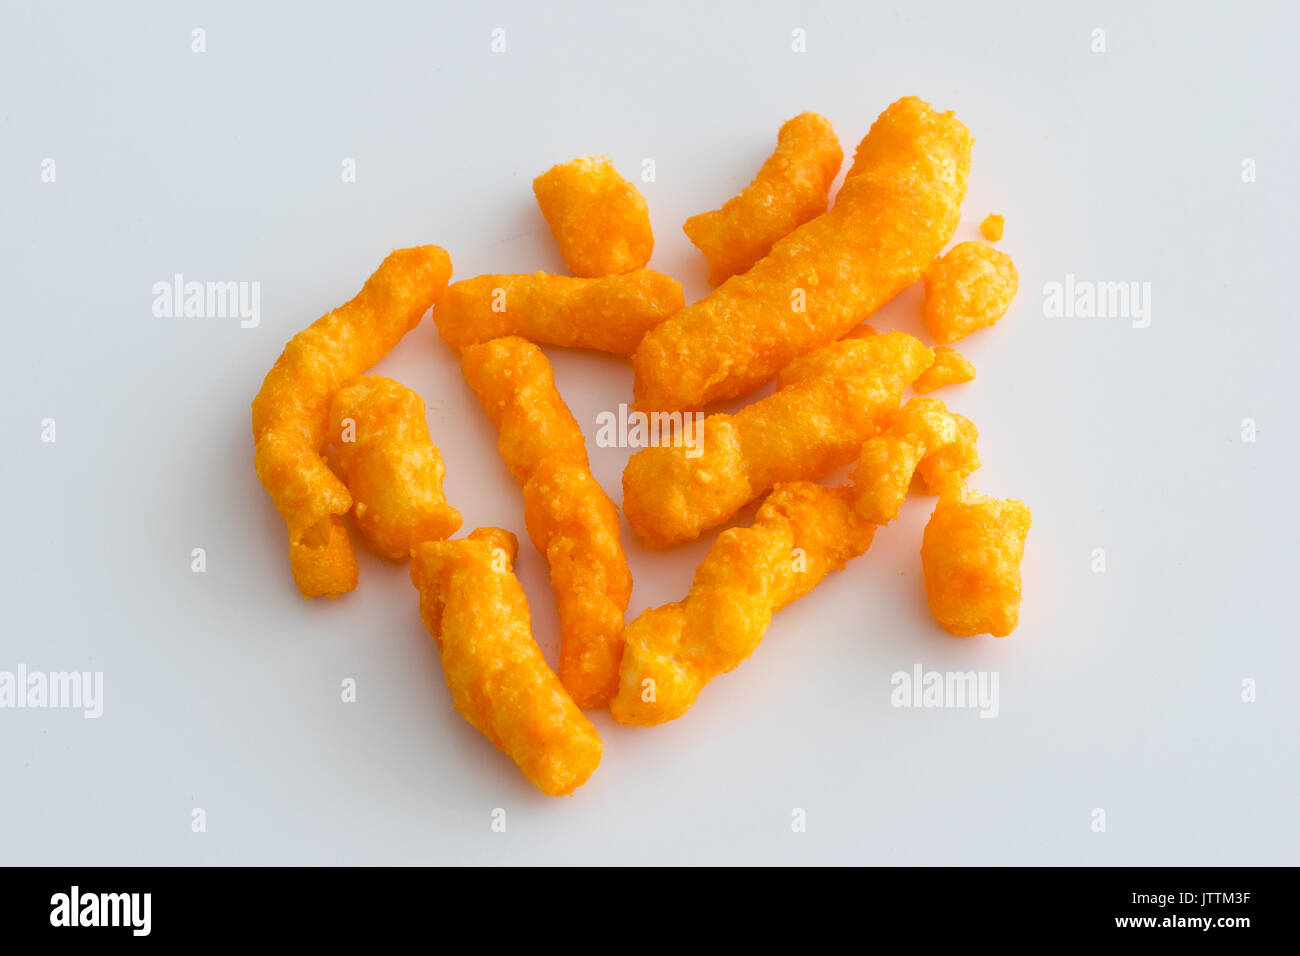 Cheezies, a brand of cheese puffs snack food made and sold in Canada by W.T. Hawkins Ltd. Stock Photo